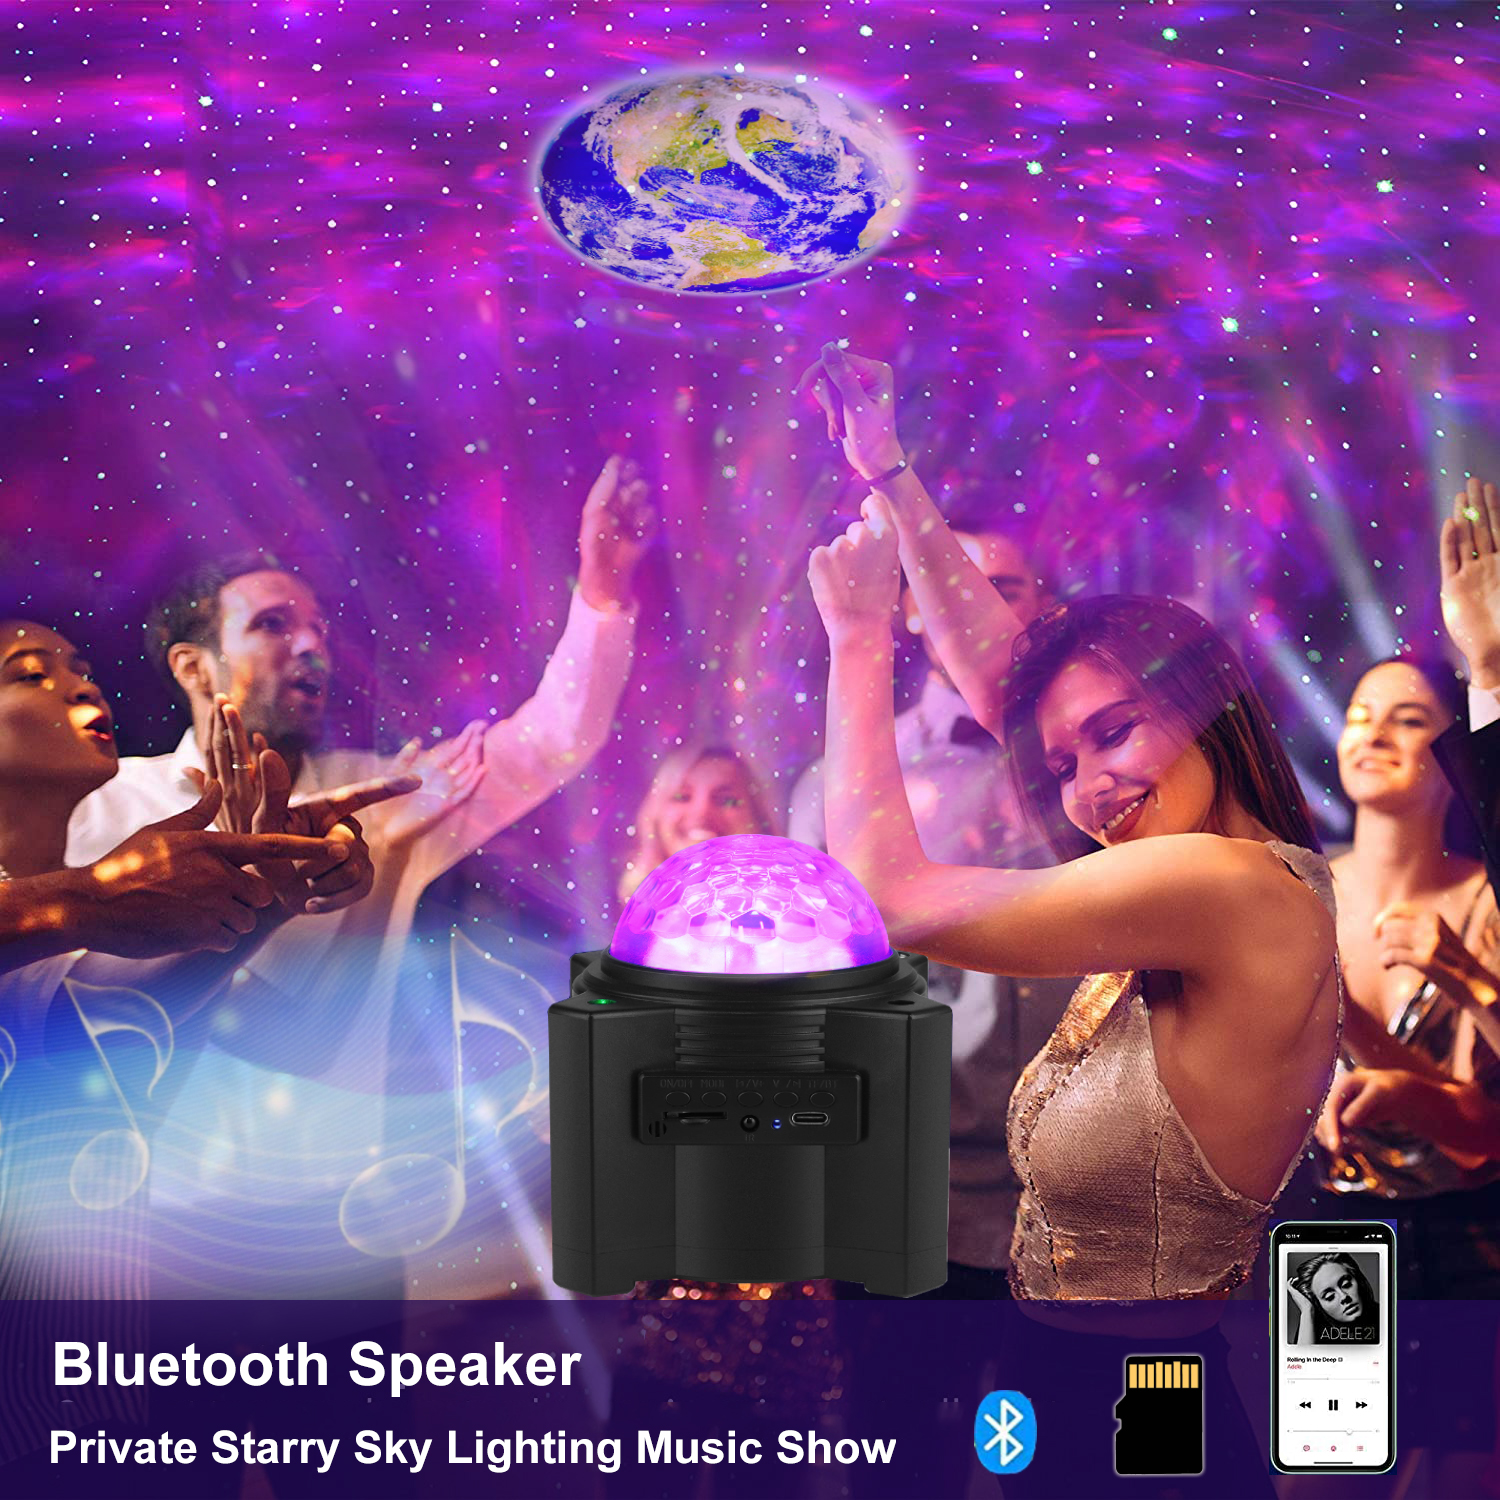 LED-Galaxy-Projector-Nebula-Night-Light-Mood-Lamp-with-Remote-with-Bluetooth-Speaker-for-Kids-and-Ad-1907929-4